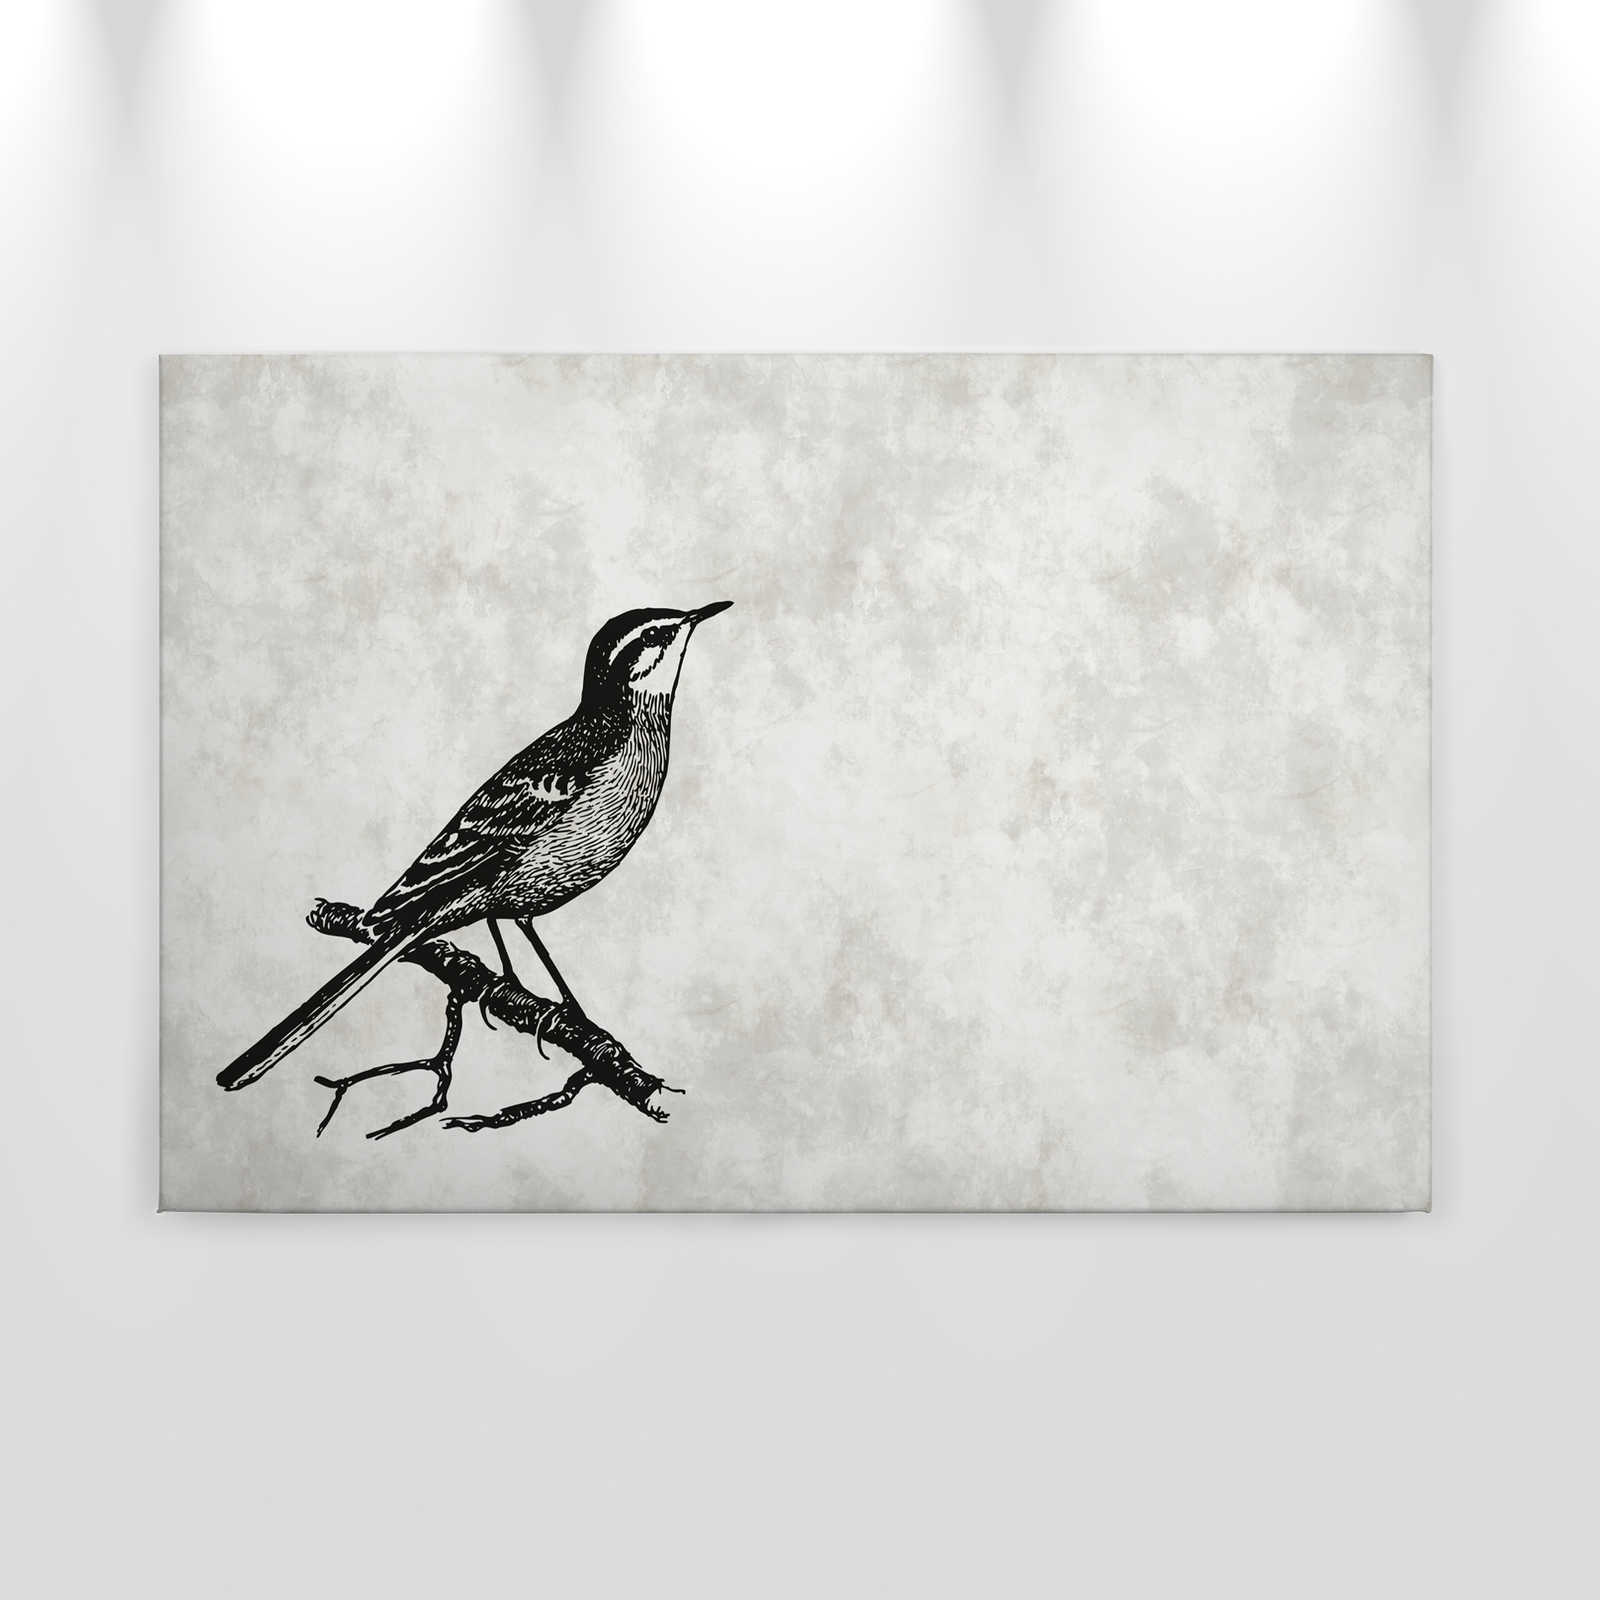             Bird canvas picture in character look with plaster optics - 0.90 m x 0.60 m
        